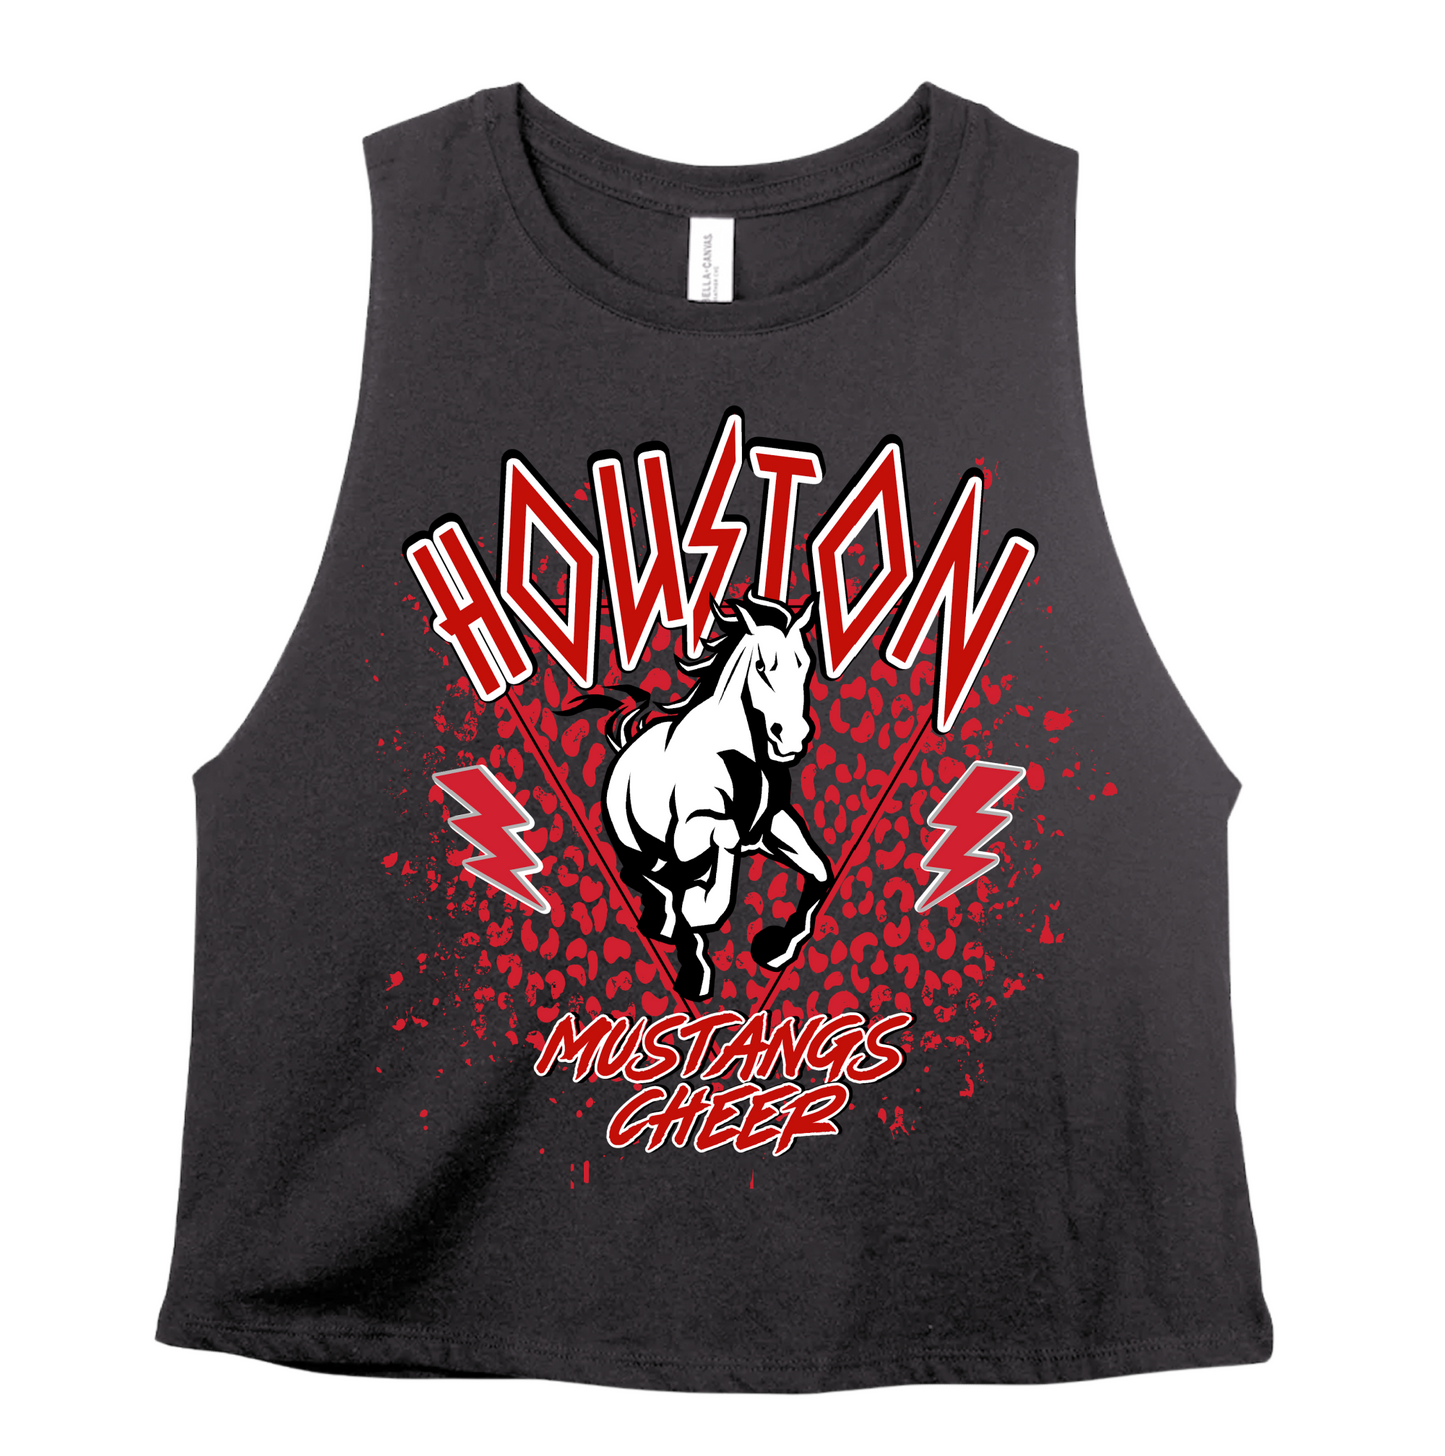 Houston Cheer Rocker Cropped Bella Tank / Can Be Customized To Pom/Dance/Etc.